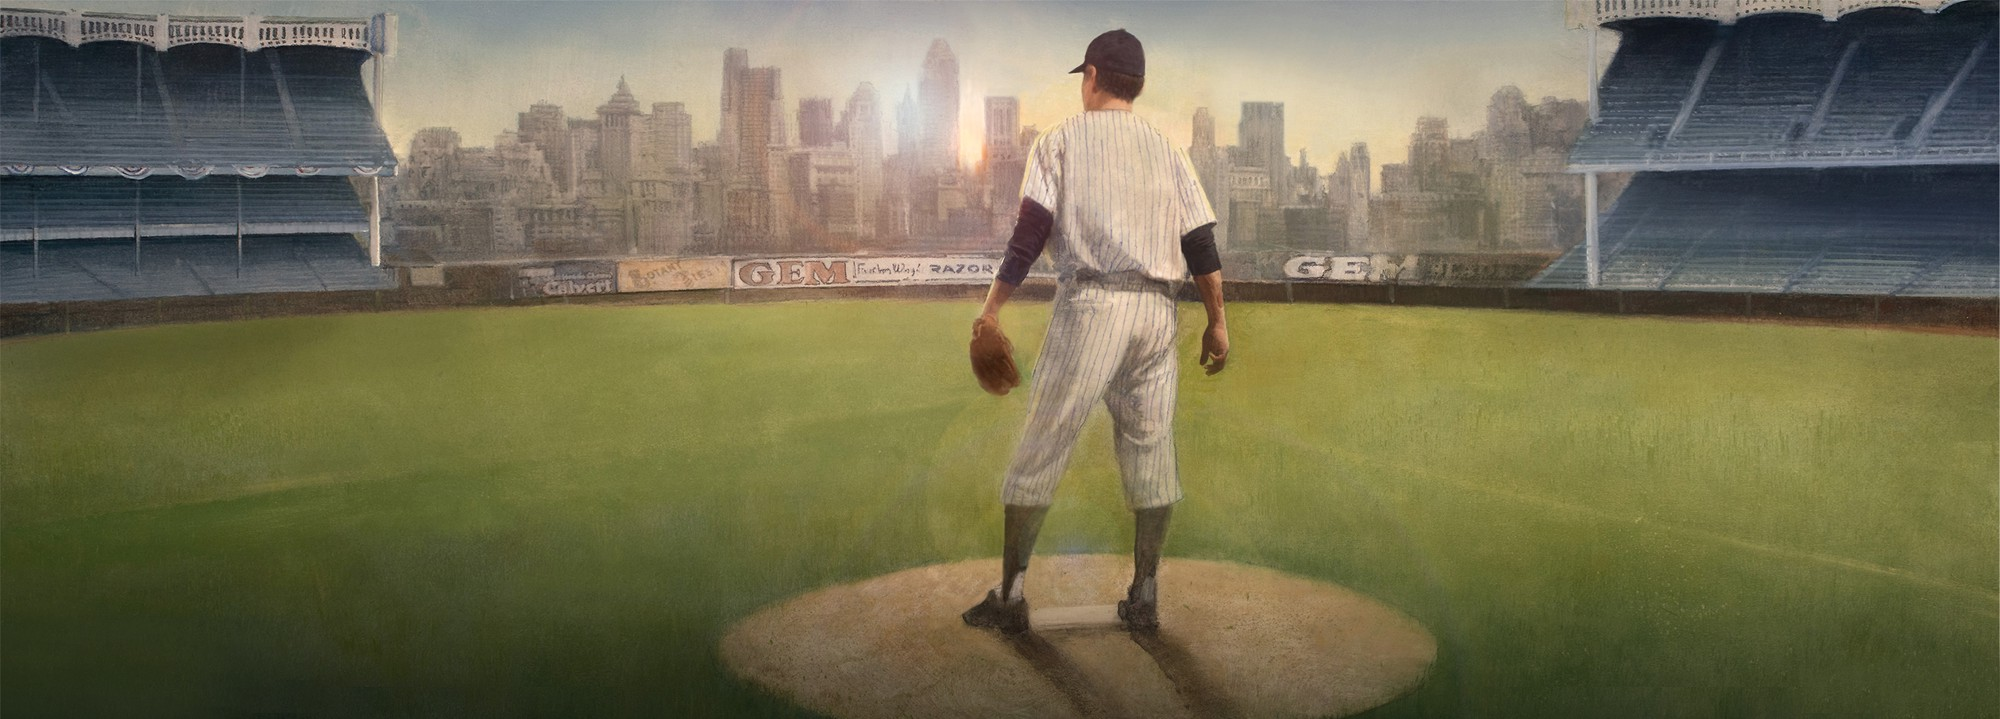 Lou Gehrig: A Terrible Loneliness”, by Myles Thomas, The Diary of Myles  Thomas